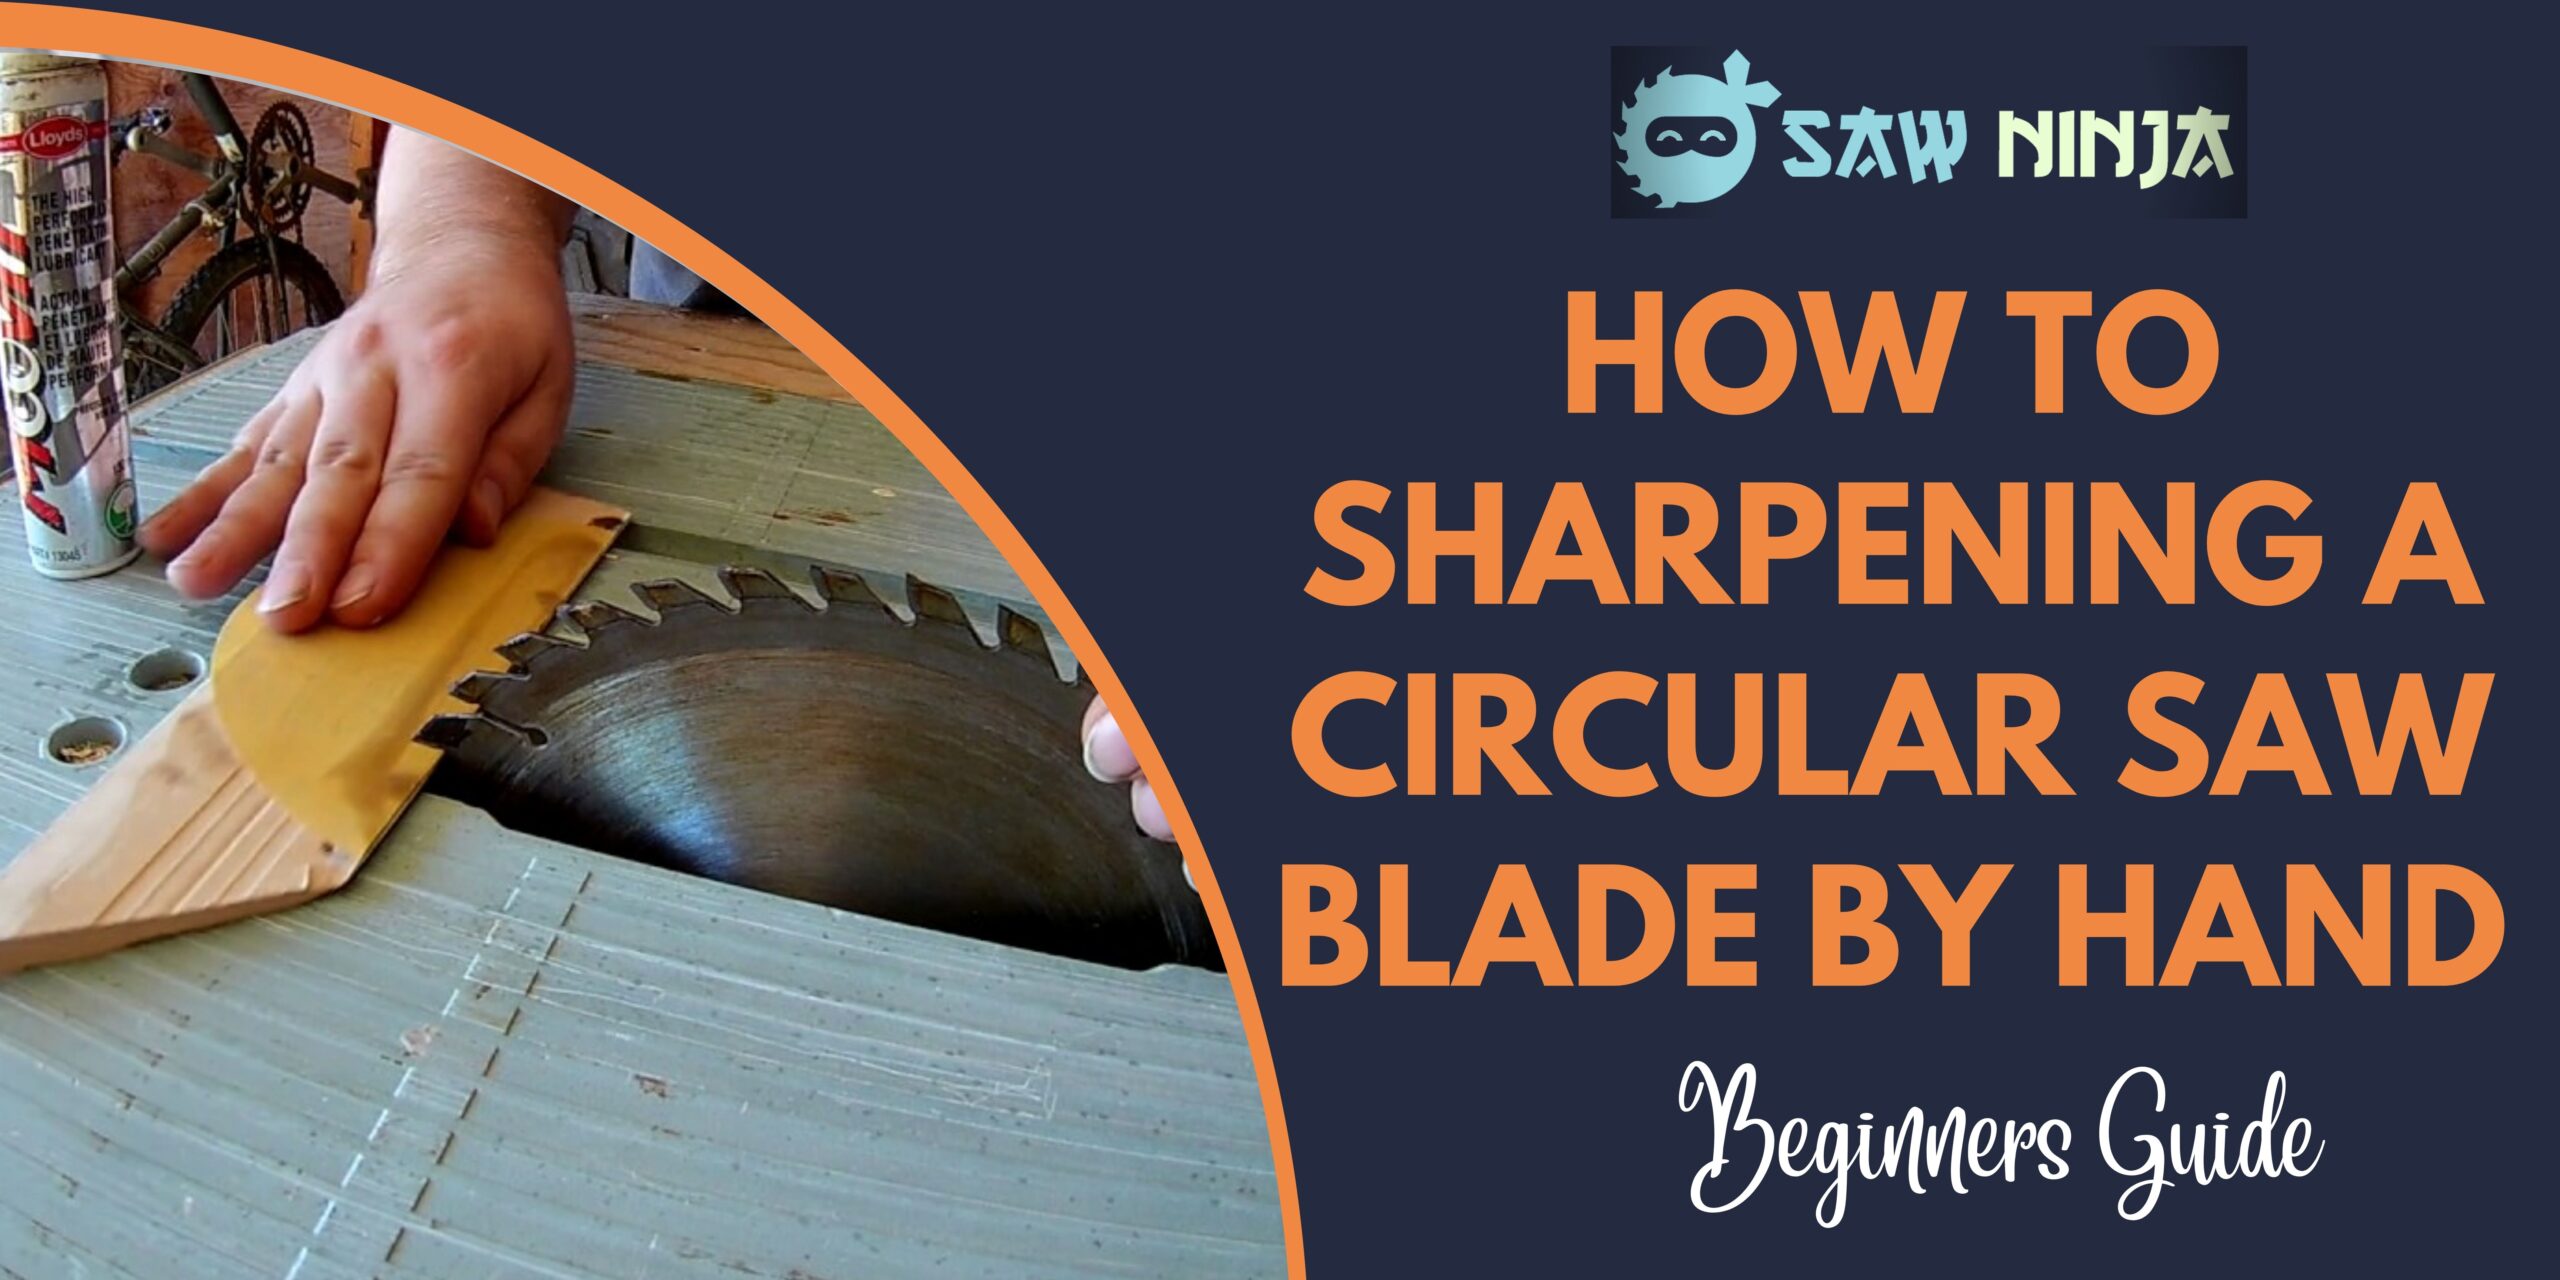 How to Sharpening a circular Saw Blade By Hand